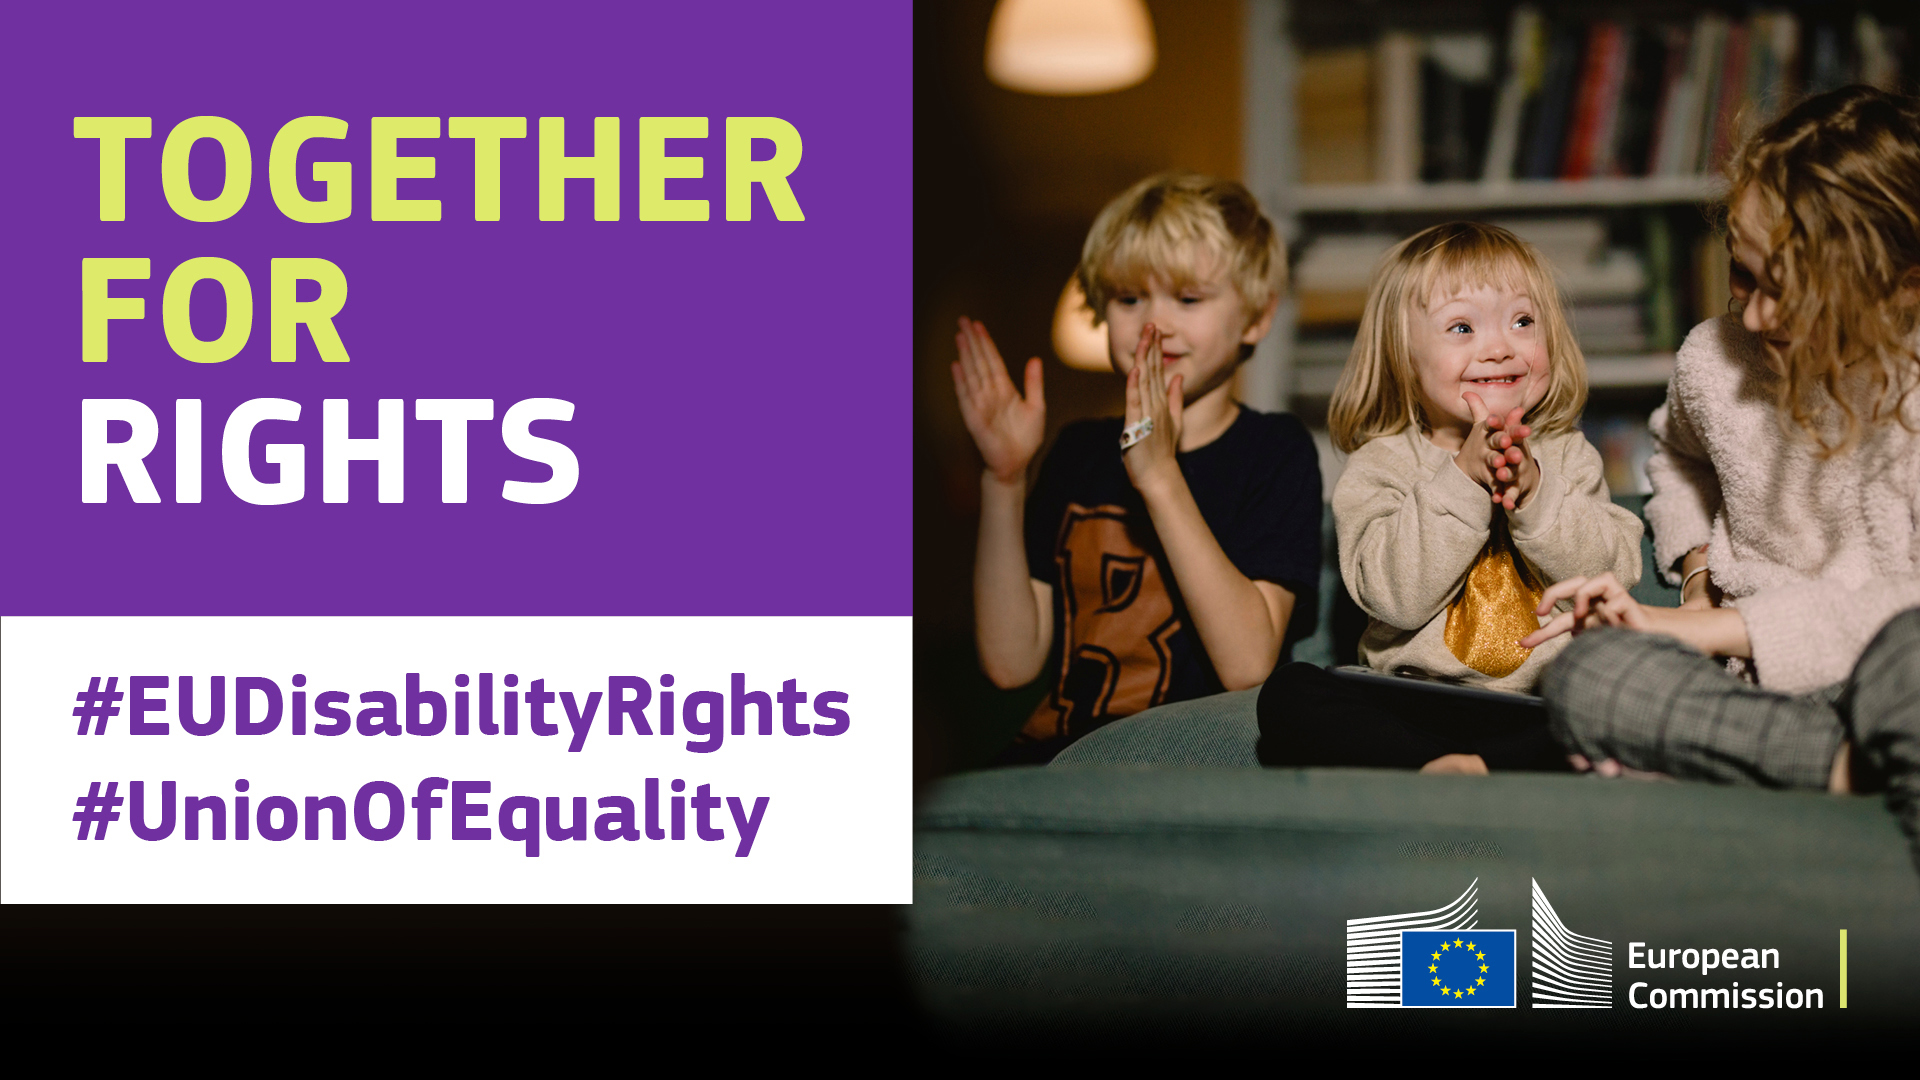 Three children happily playing together. One has down syndrome. Text saying: together for rights, #EUDisabilityRights, #UnionOfEquality